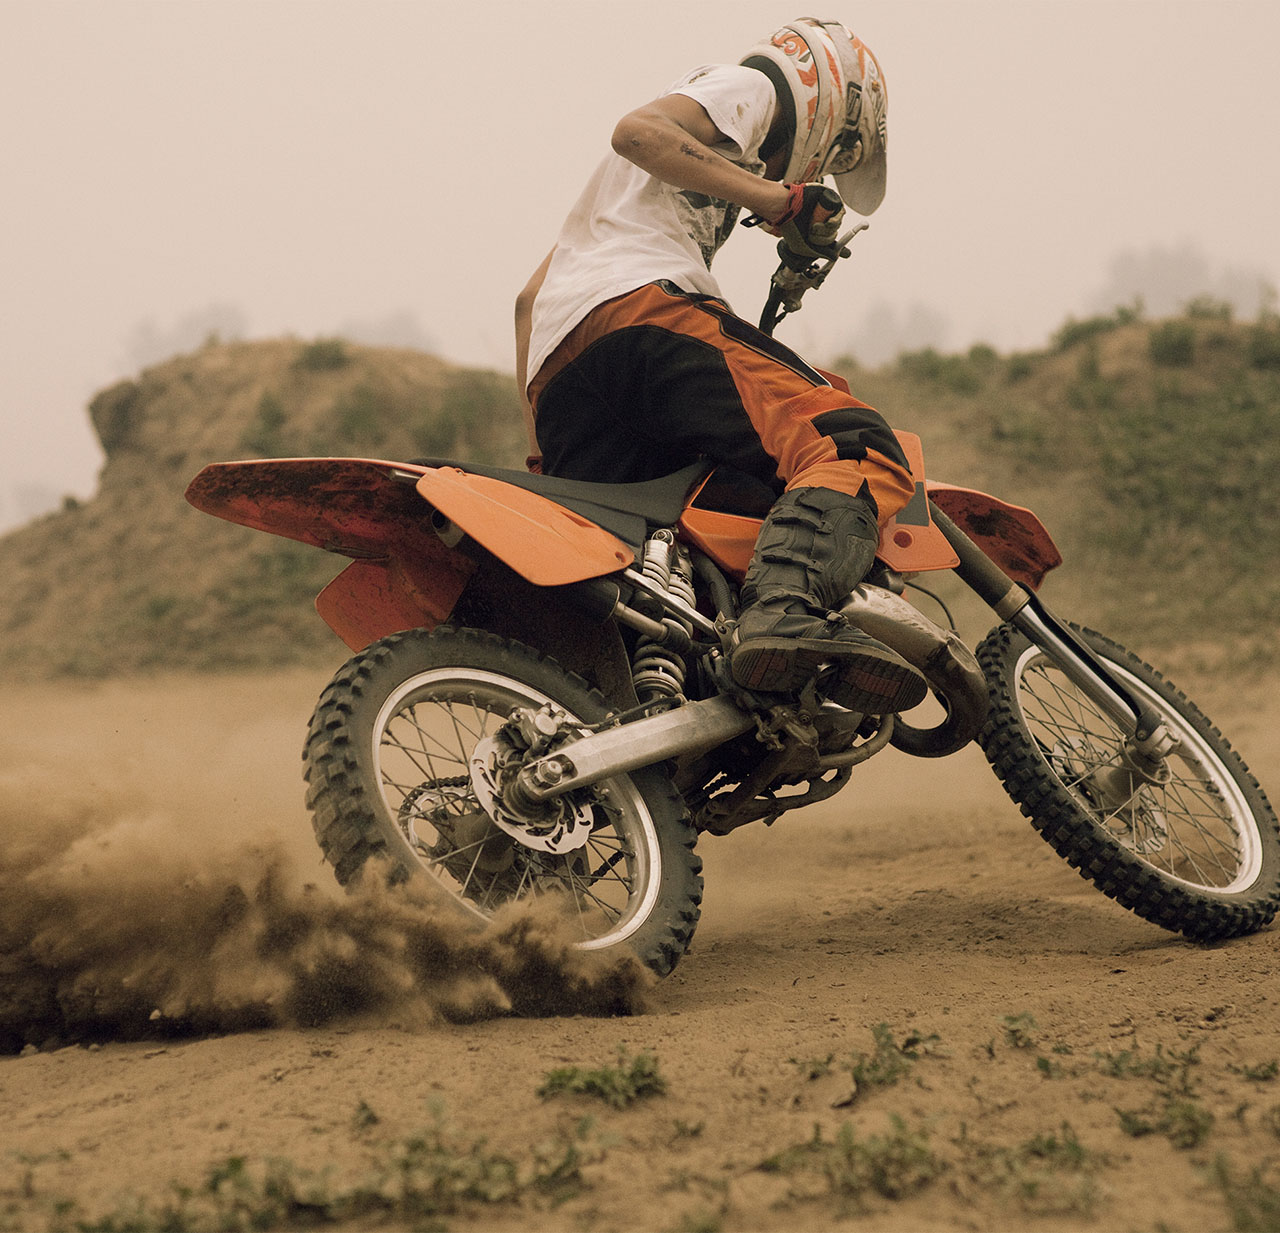 A person doing a trick on a dirt bike